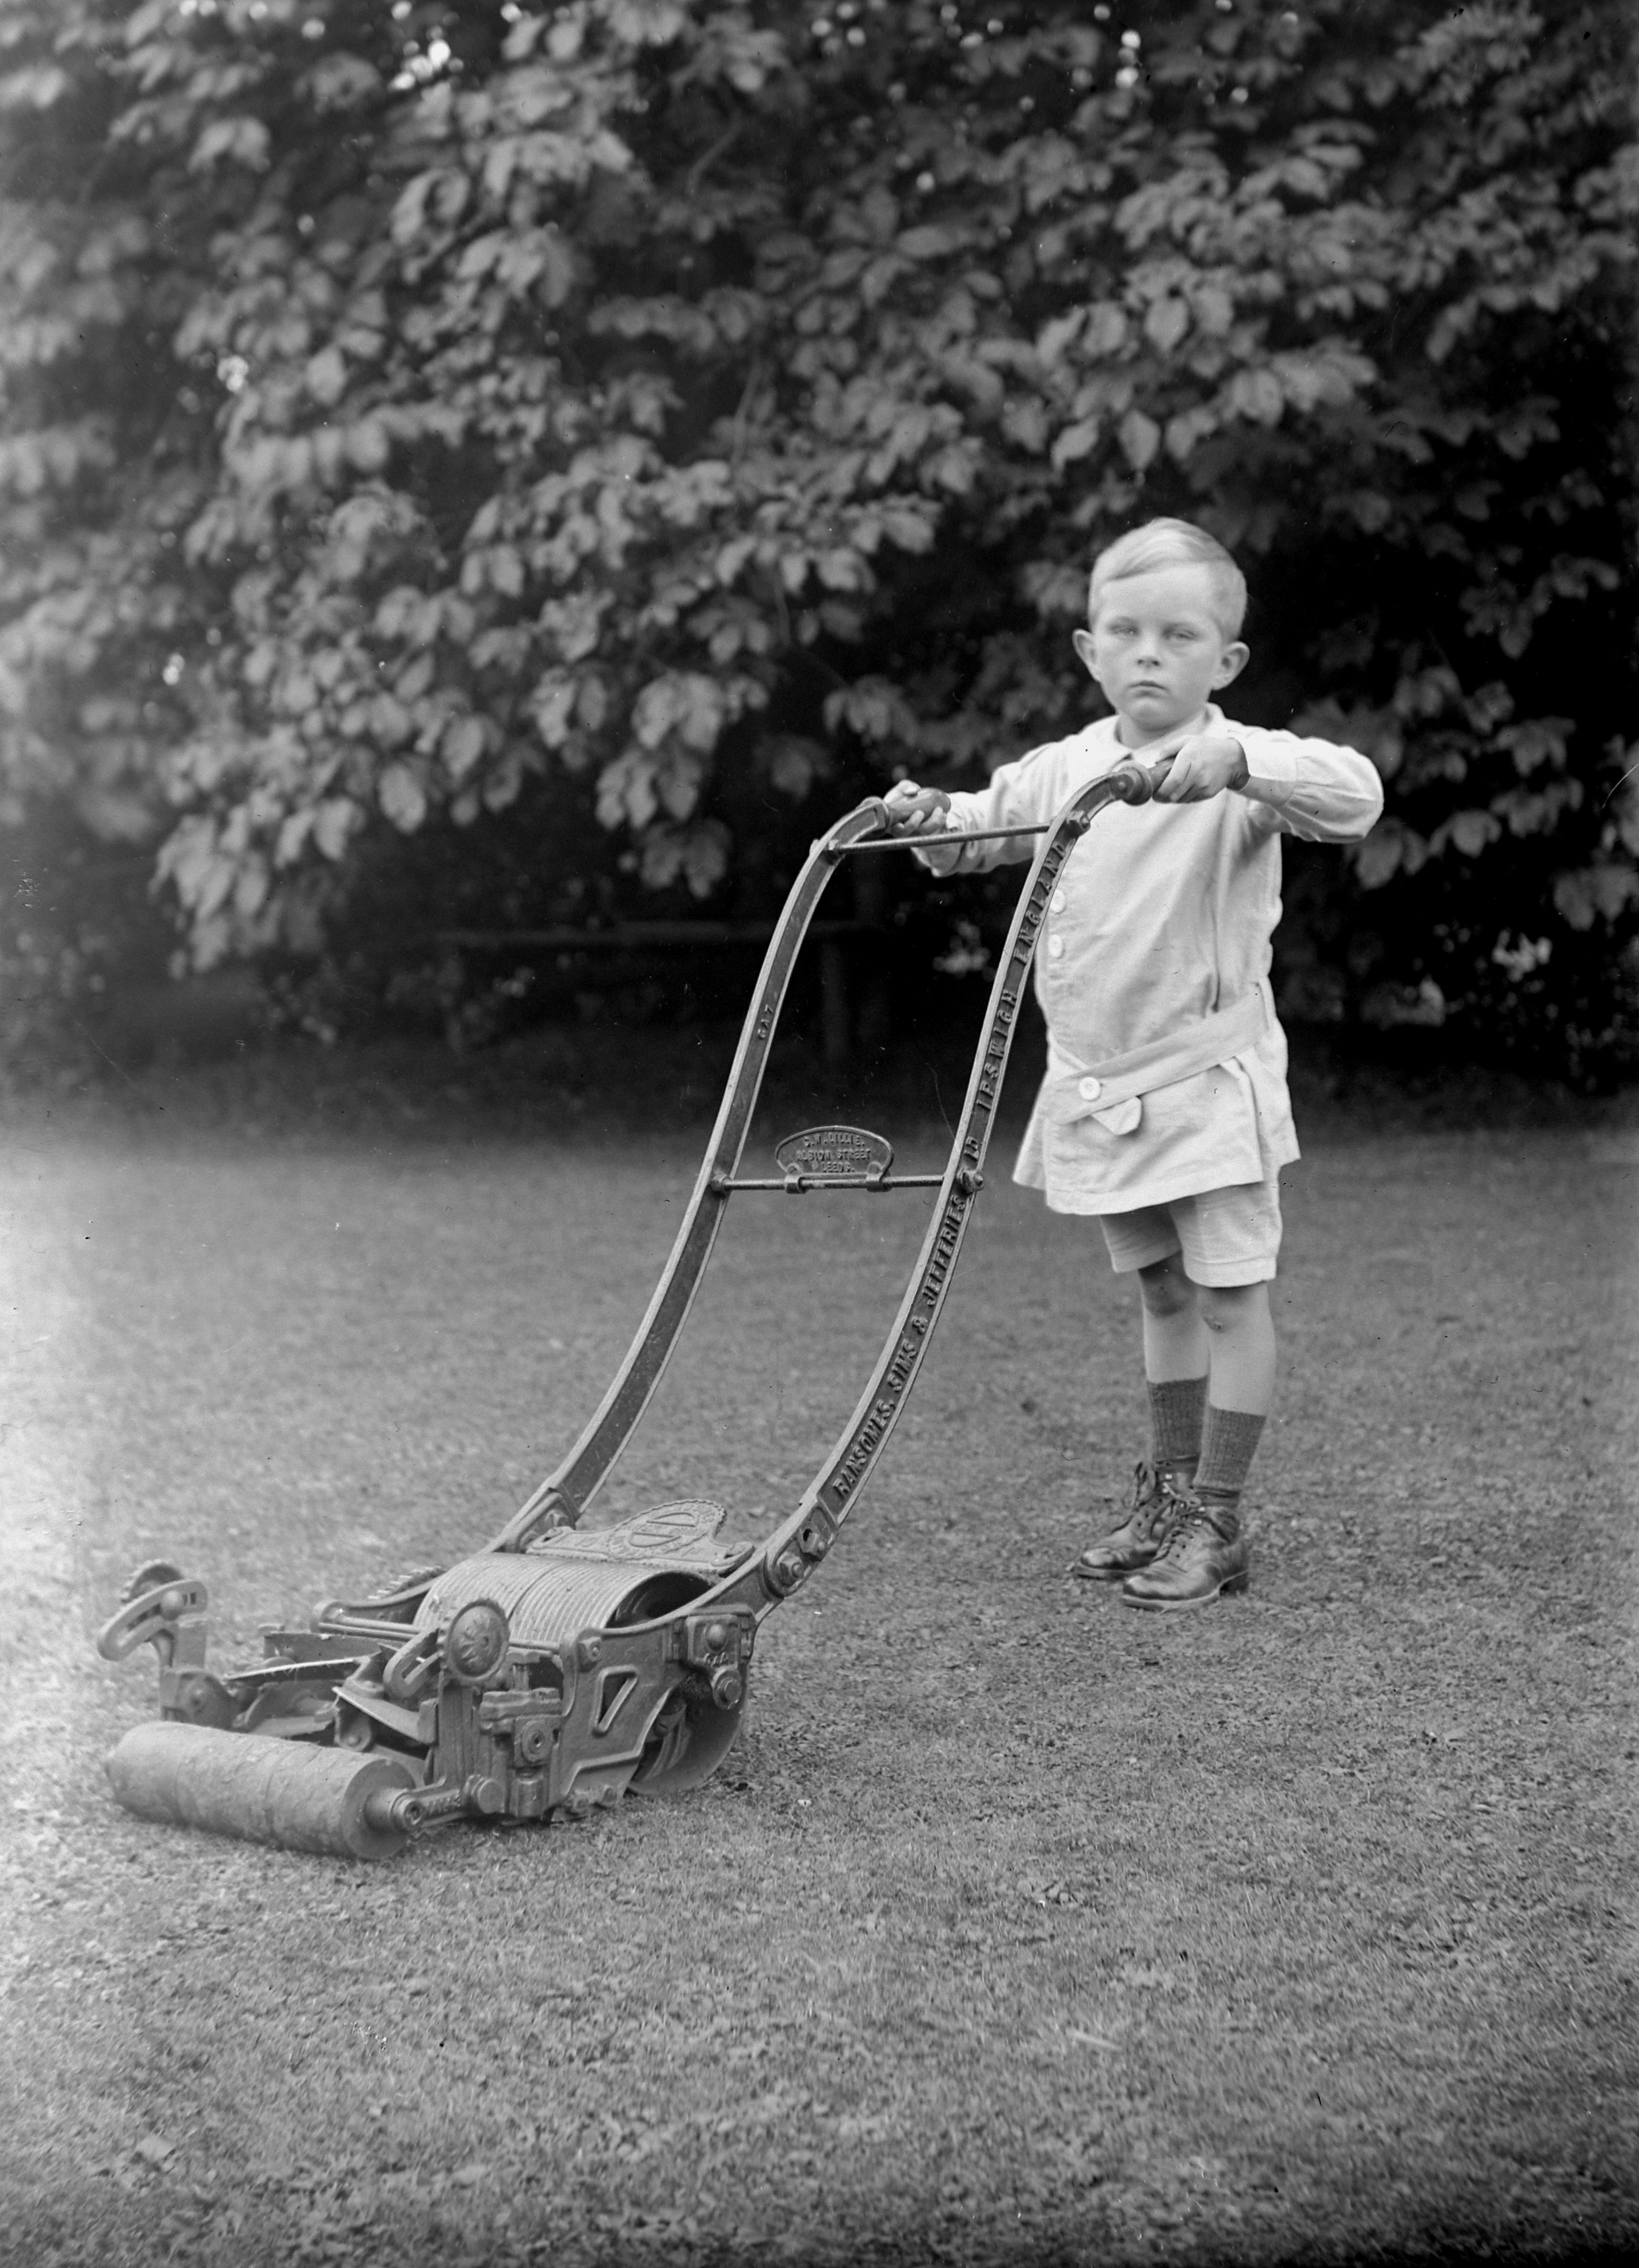 Bobbie with a Ransomes Sims and Jefferies lawnmower, Lower Dunsforth, circa 1917.  From a collection of photographs by local amateur photographer Louisa Kruckenberg.